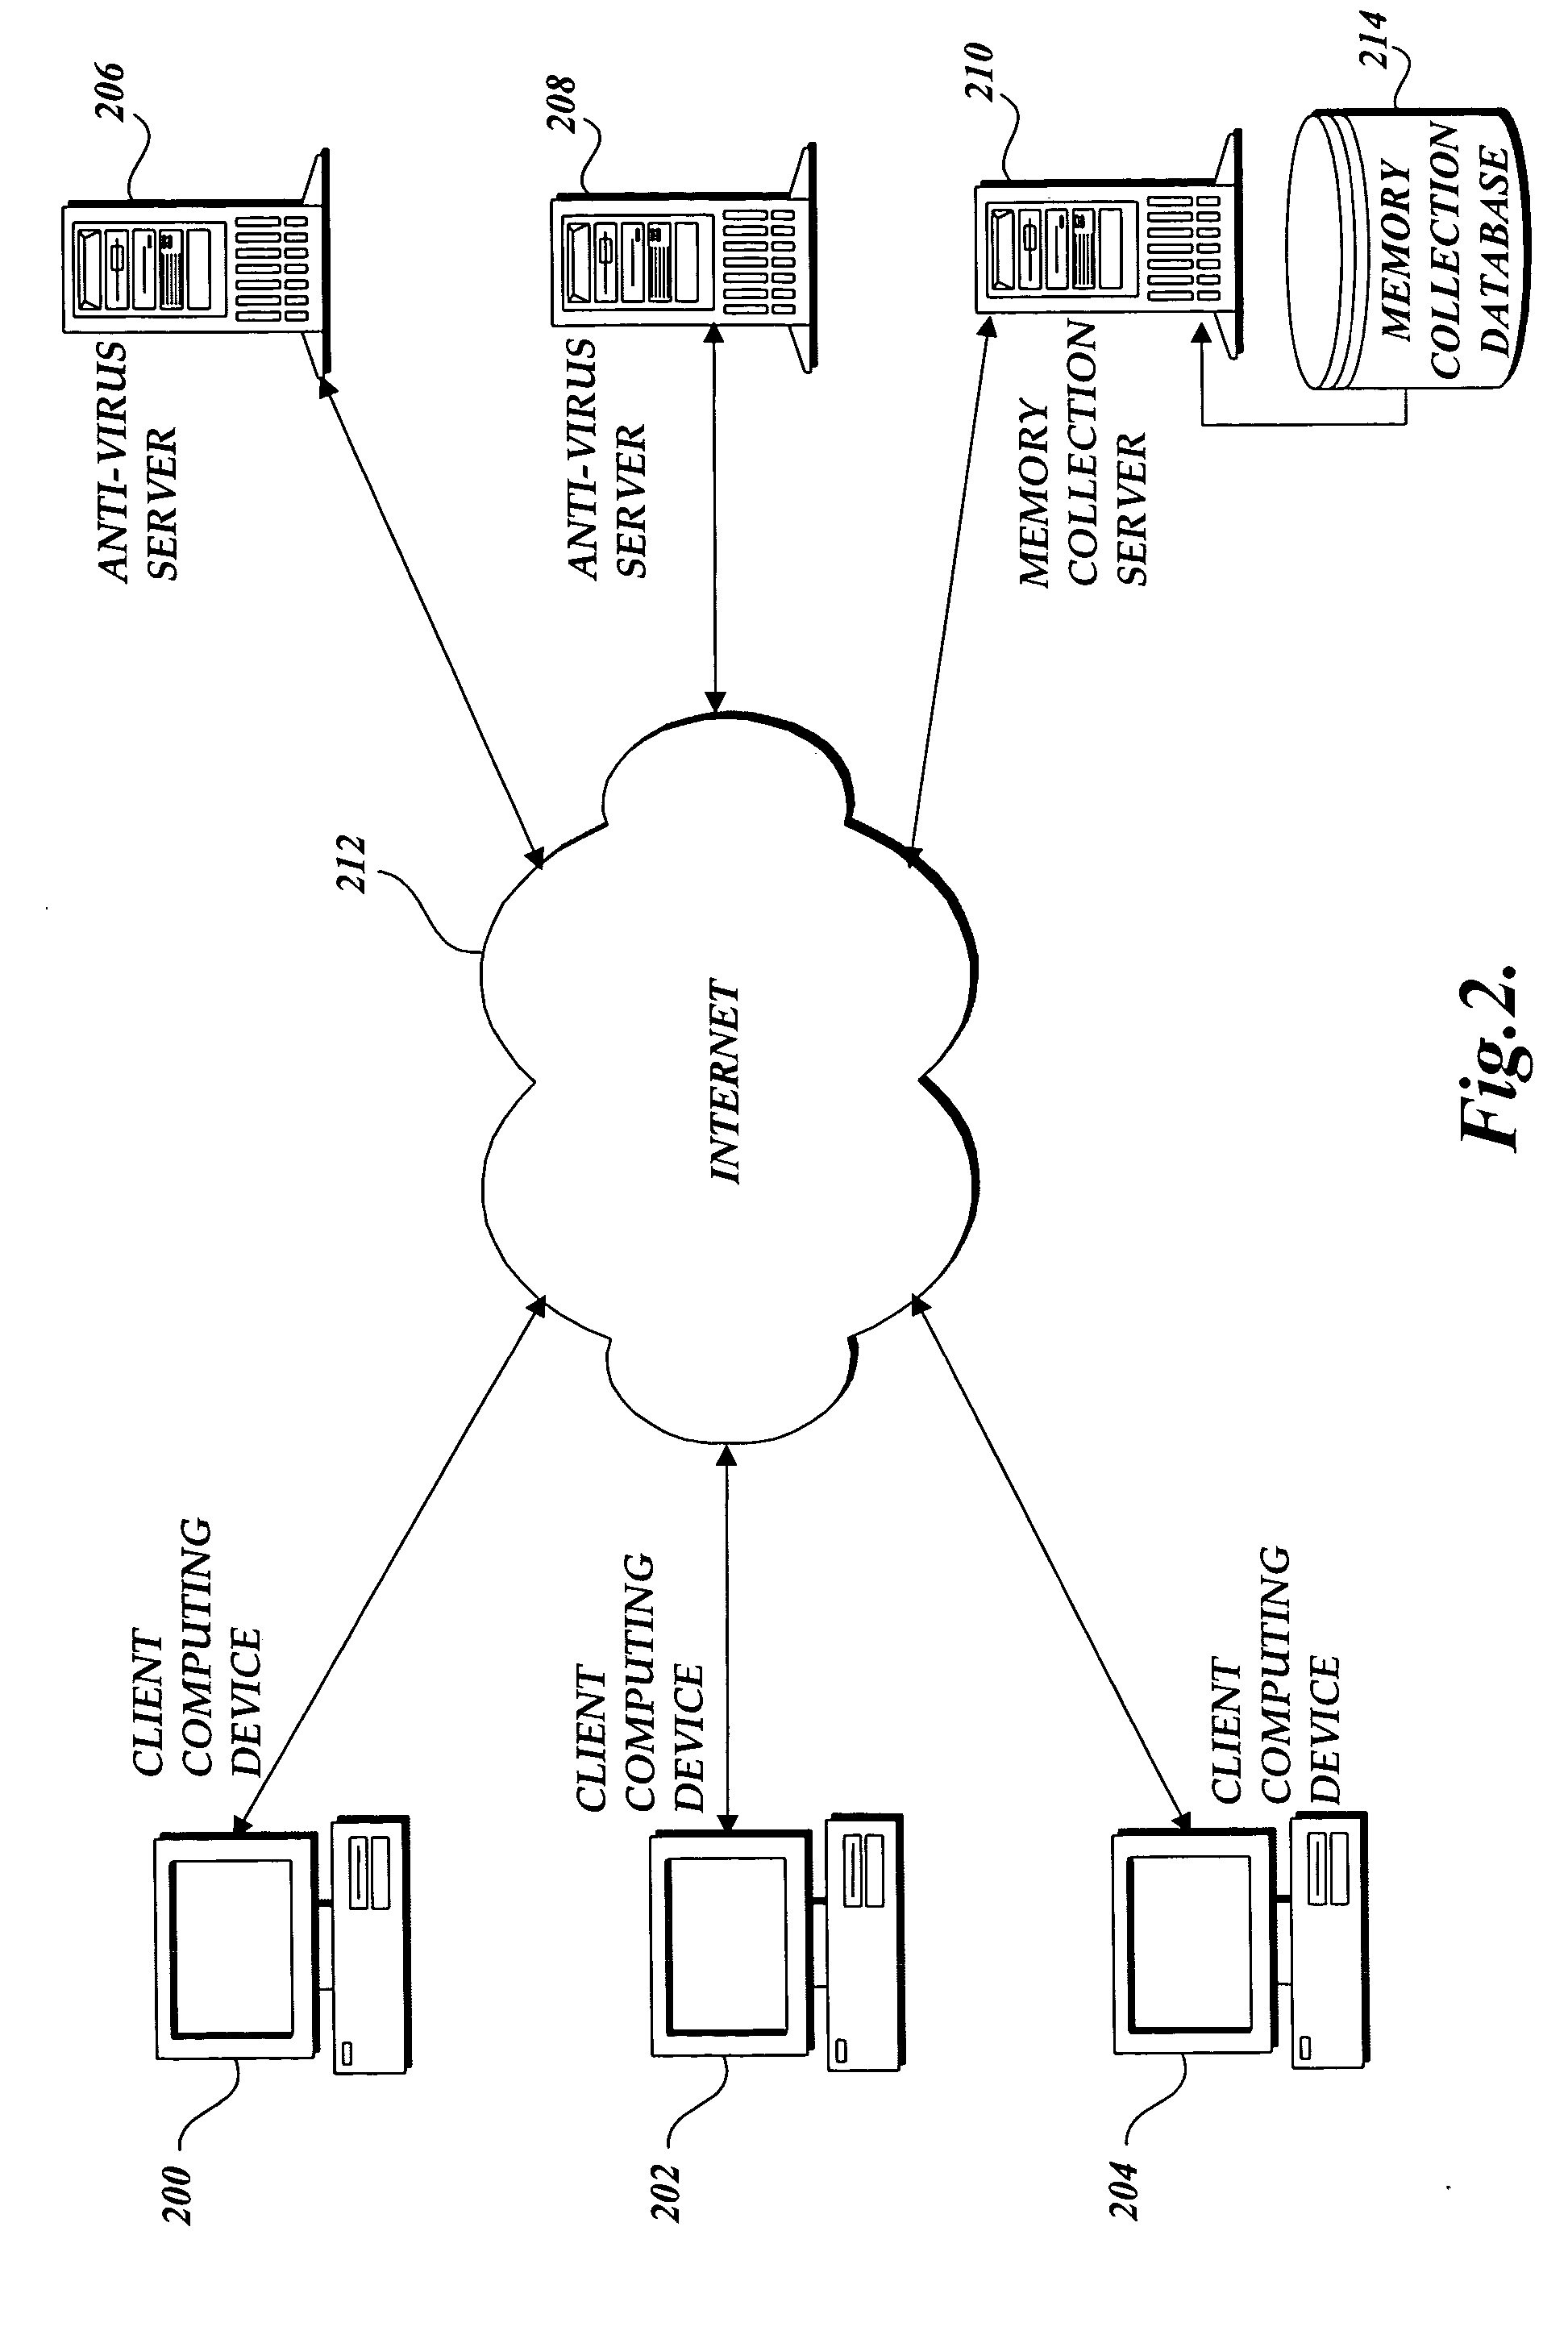 System and method of identifying the source of an attack on a computer network